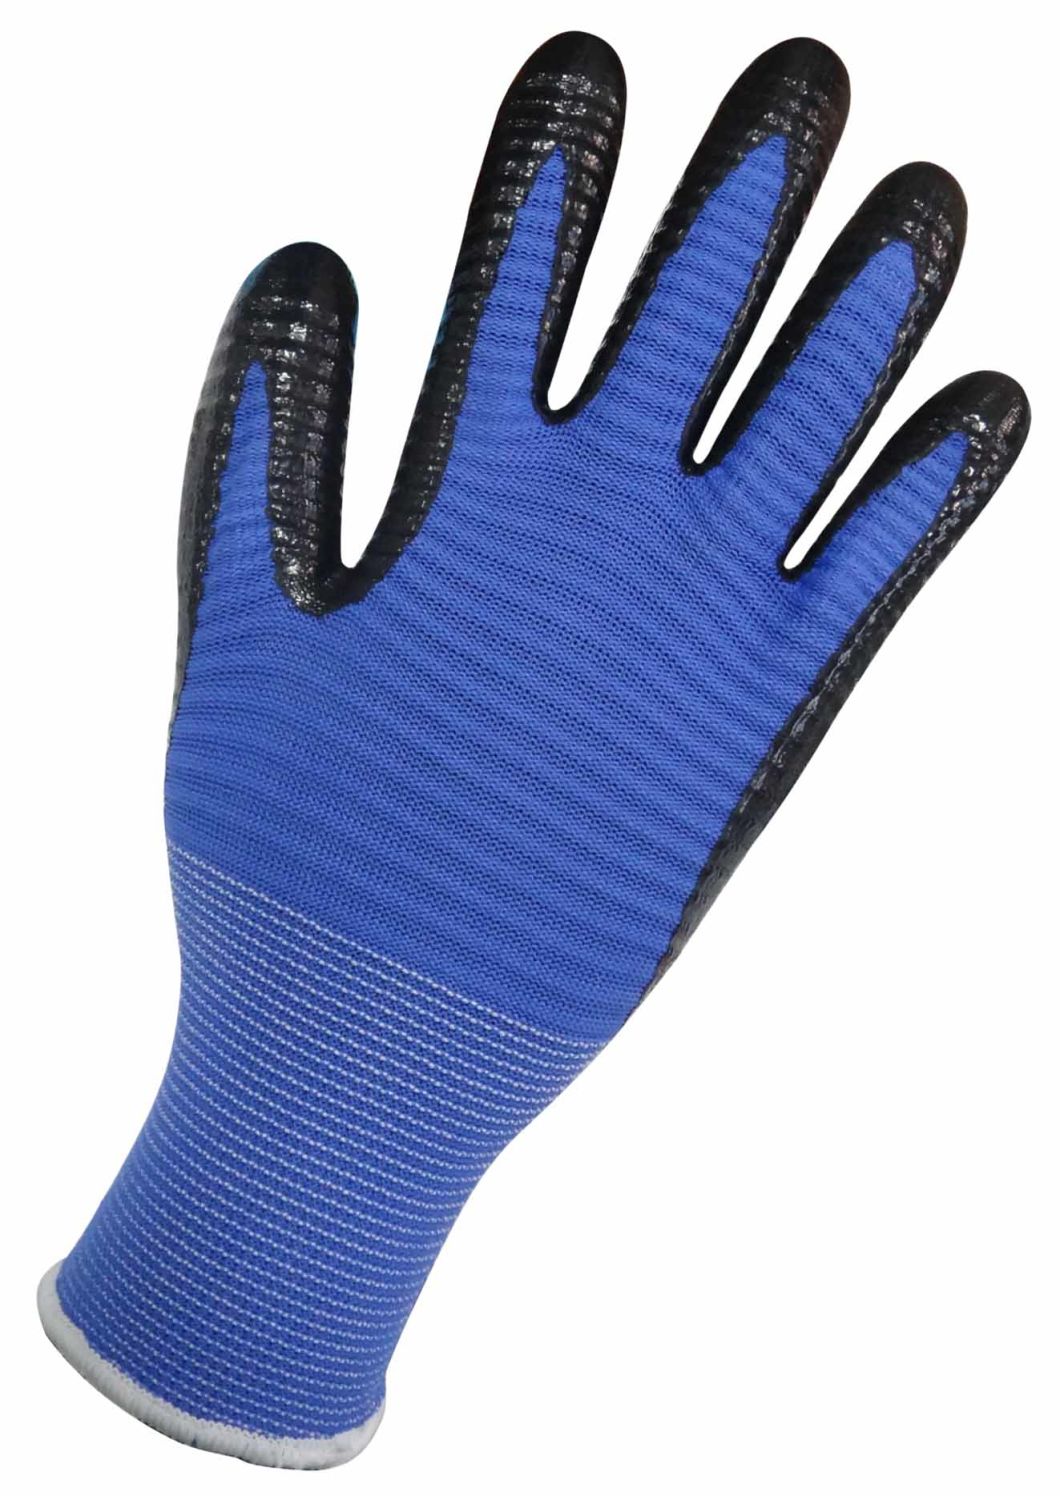 Black Nitrile Coated Puncture Resistant Work Garden Household Cleaning Mechanic Hand Protection Gloves